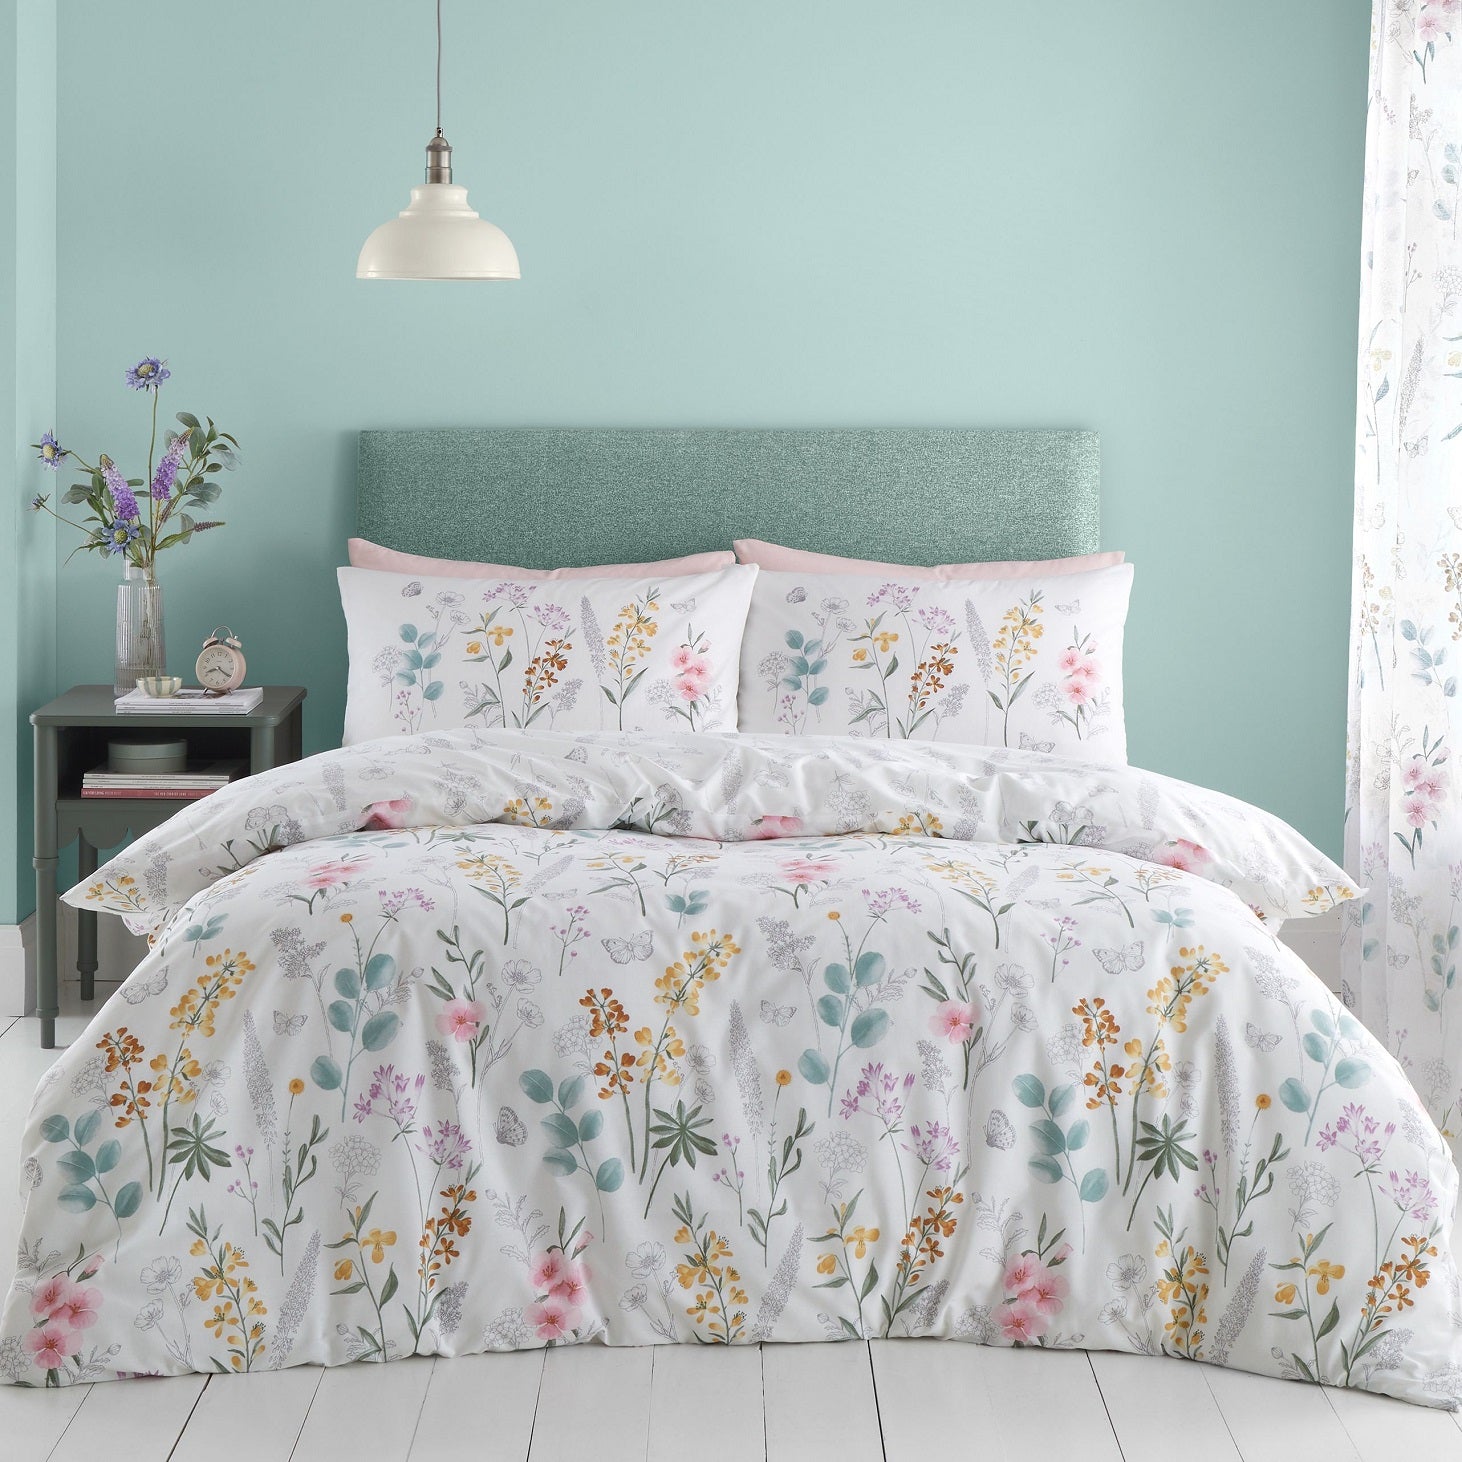 Catherine Lansfield Floral Meadow Emilia Duvet Cover Set, King, White